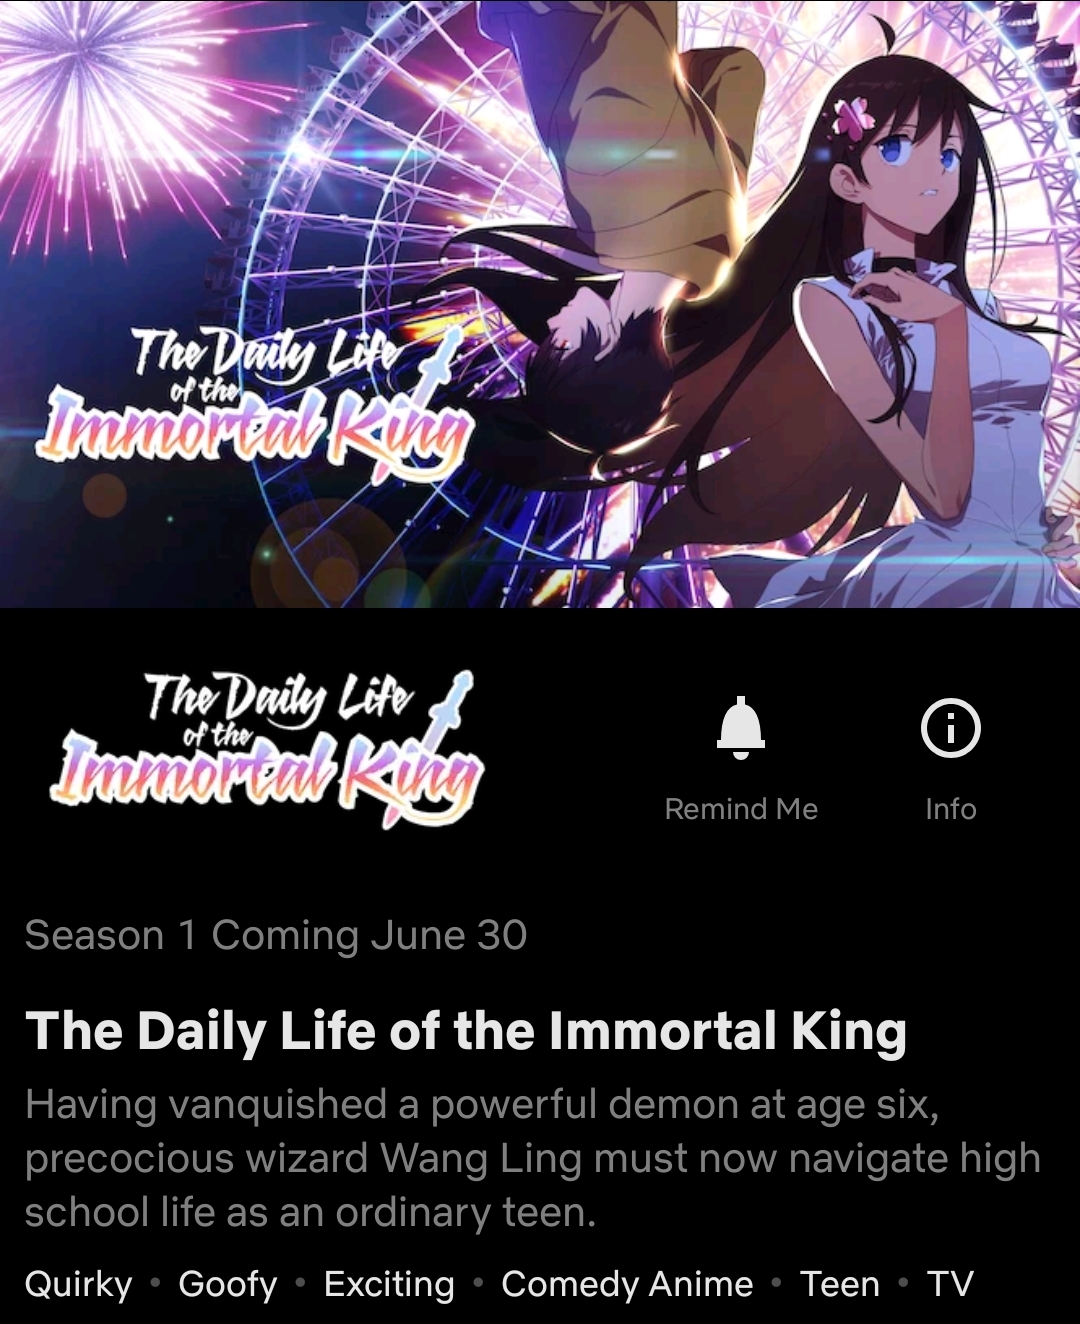 The Daily Life of the Immortal King